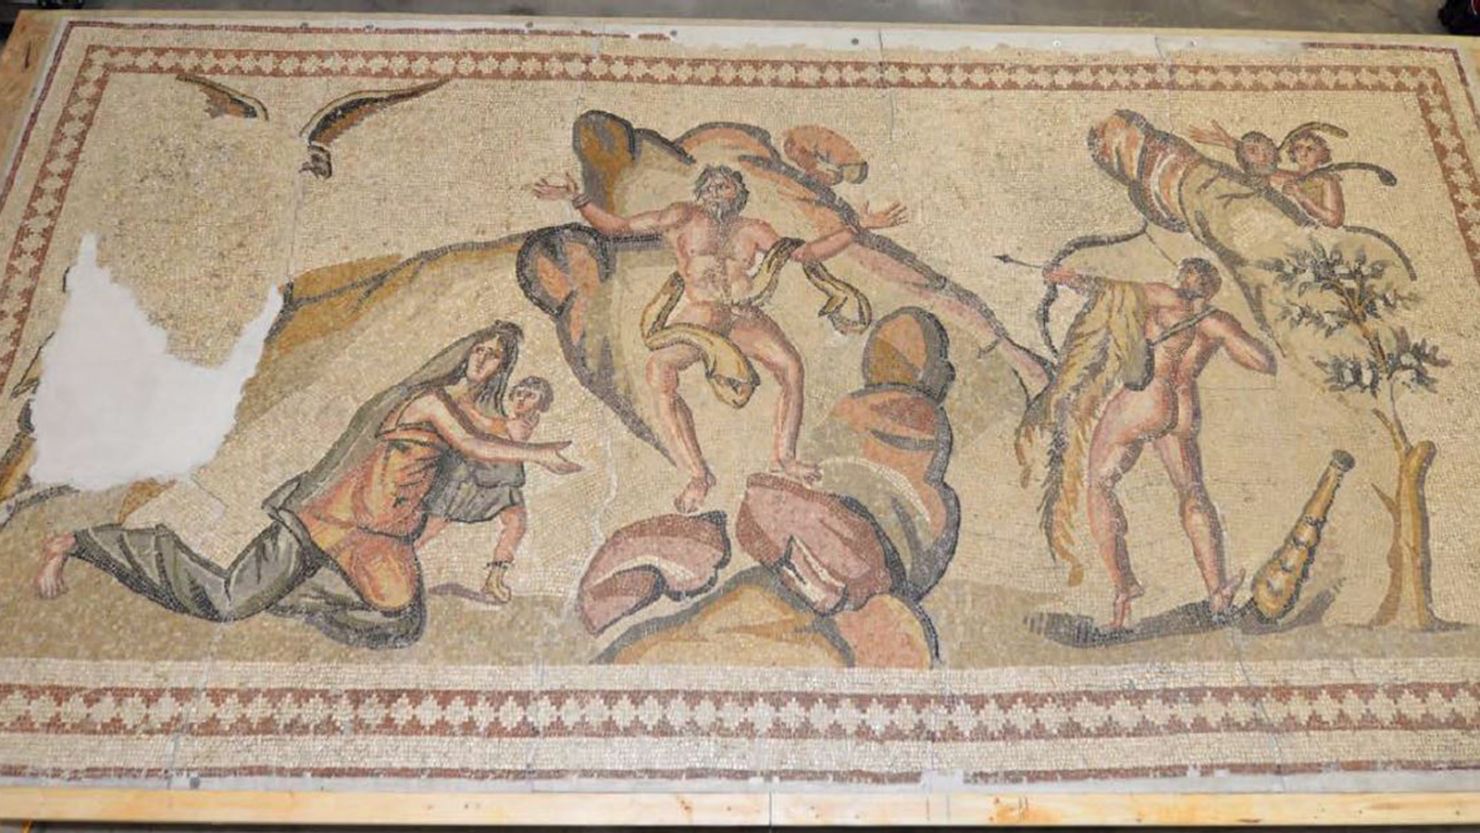 An expert told investigators the 1-ton mosaic depicts characters from Roman mythology.  